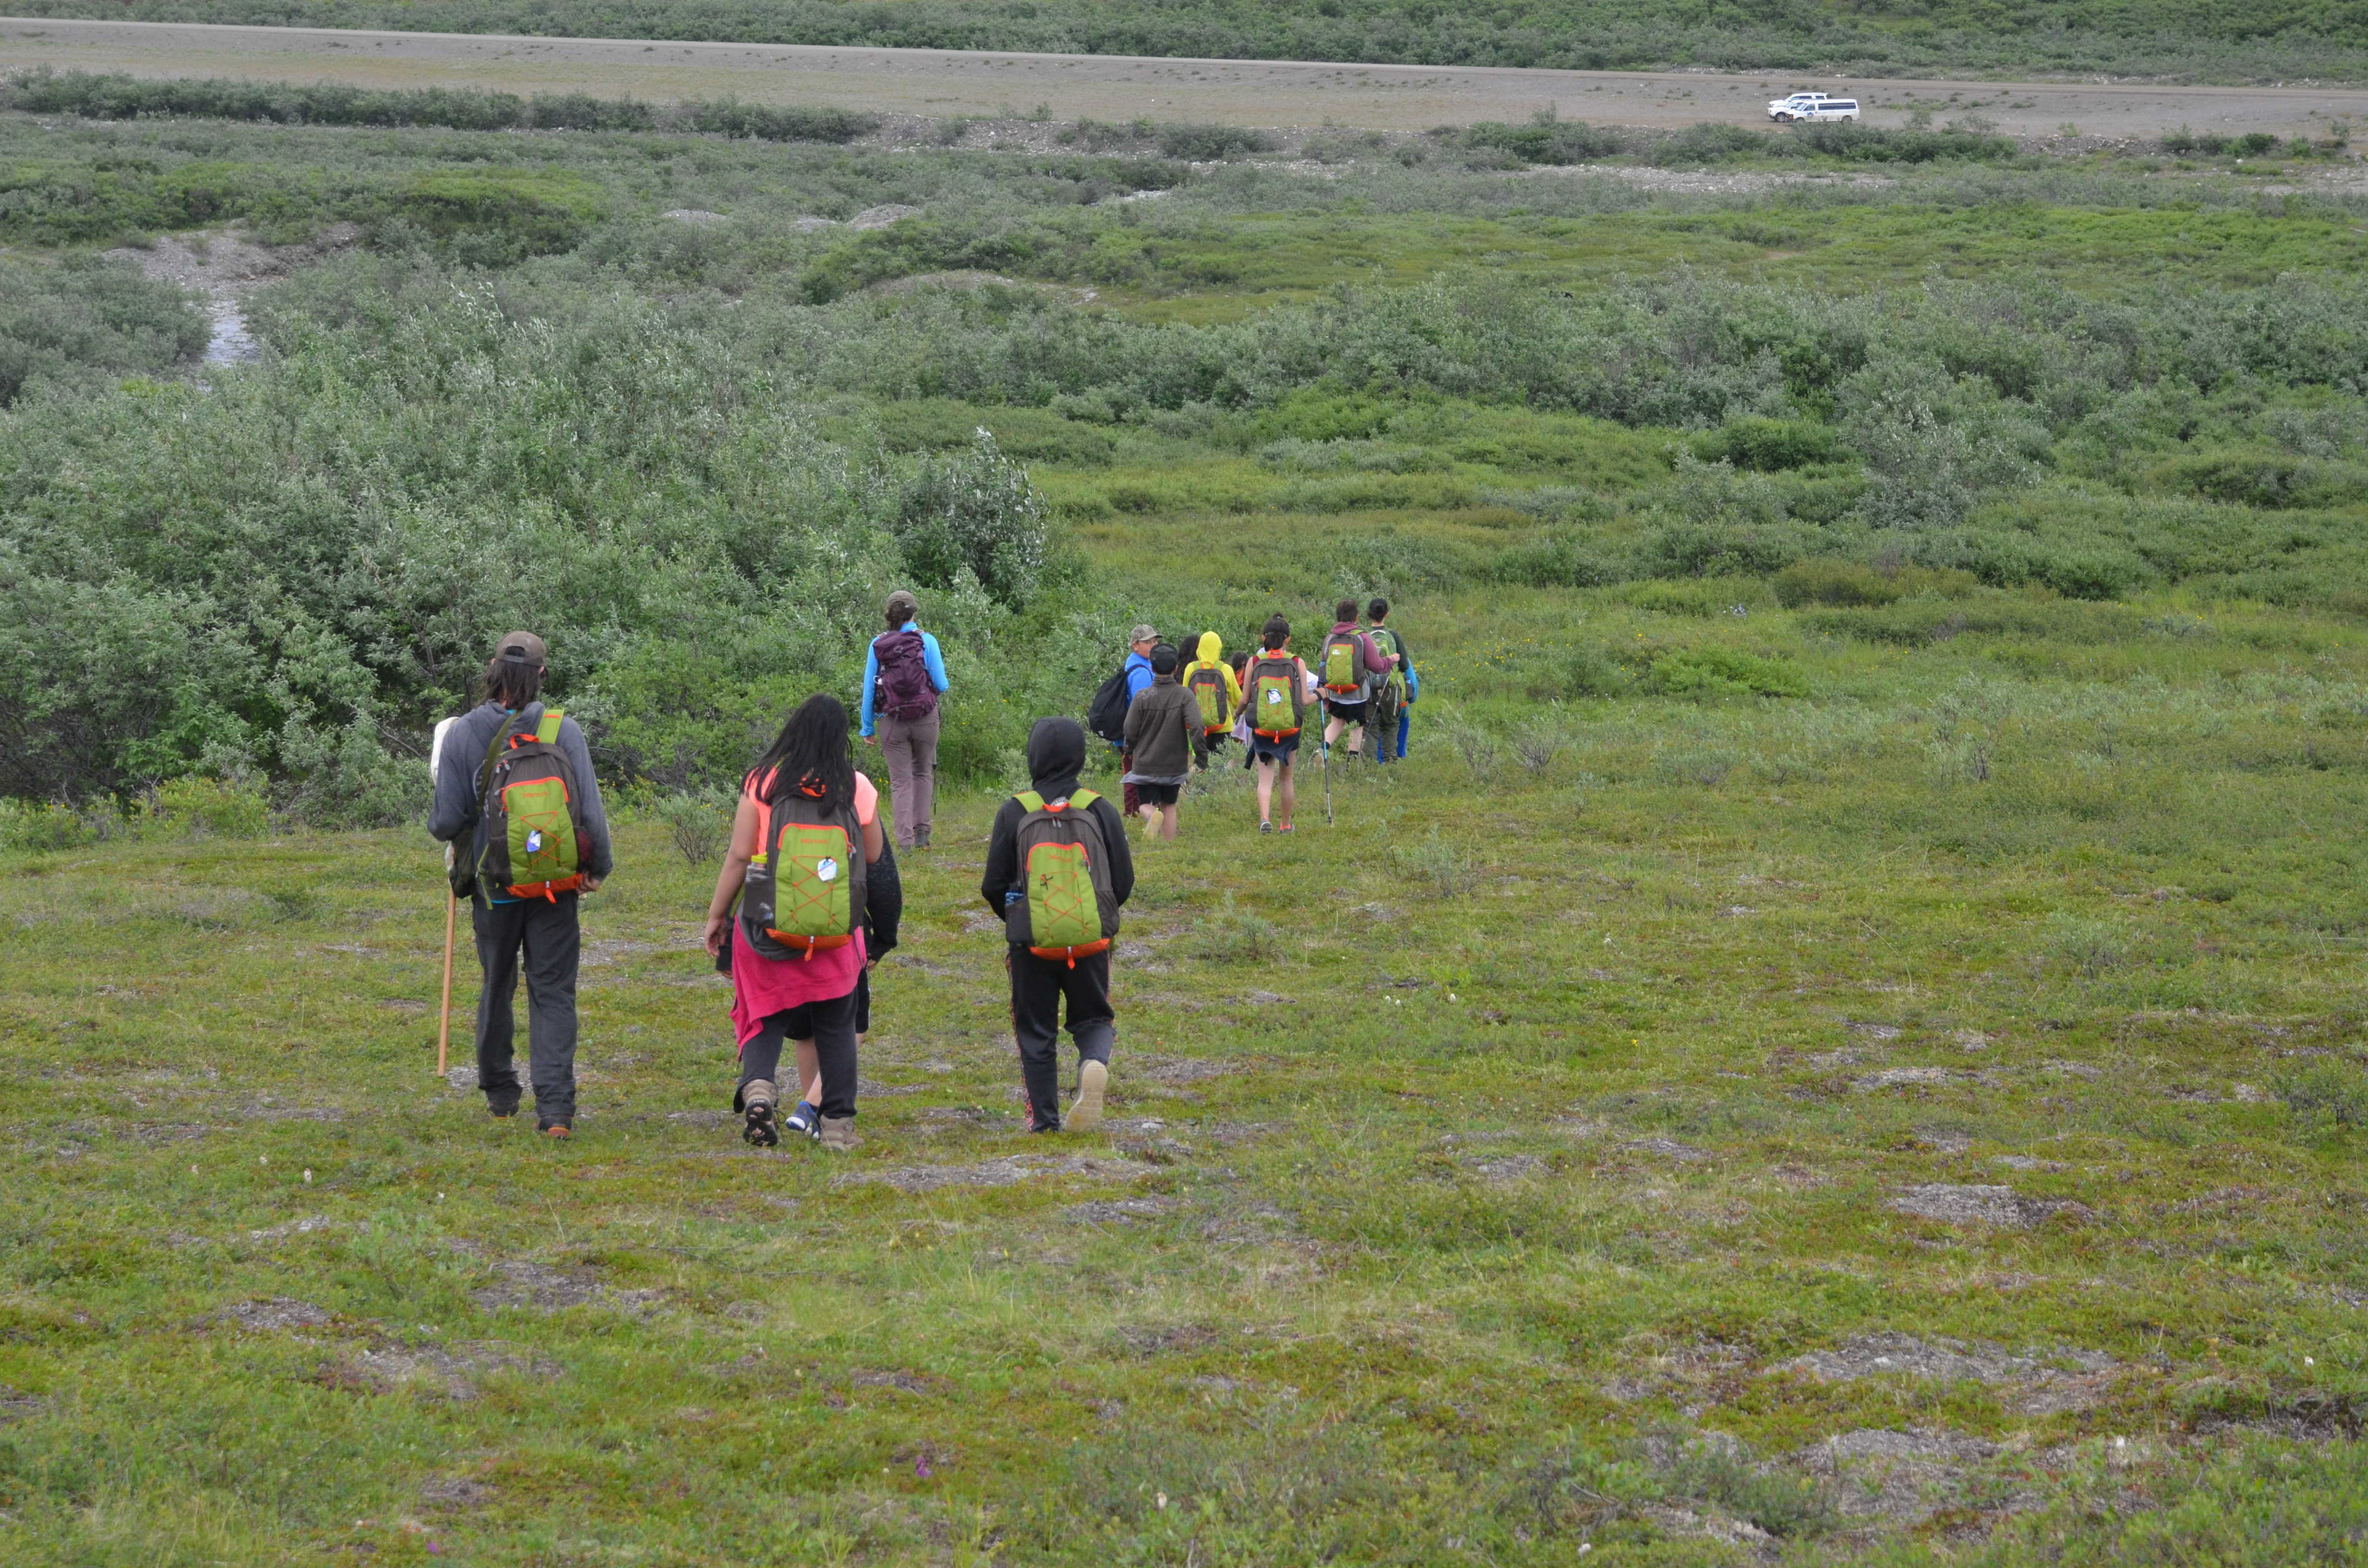 A group of kids traverse through a grassy meadow.